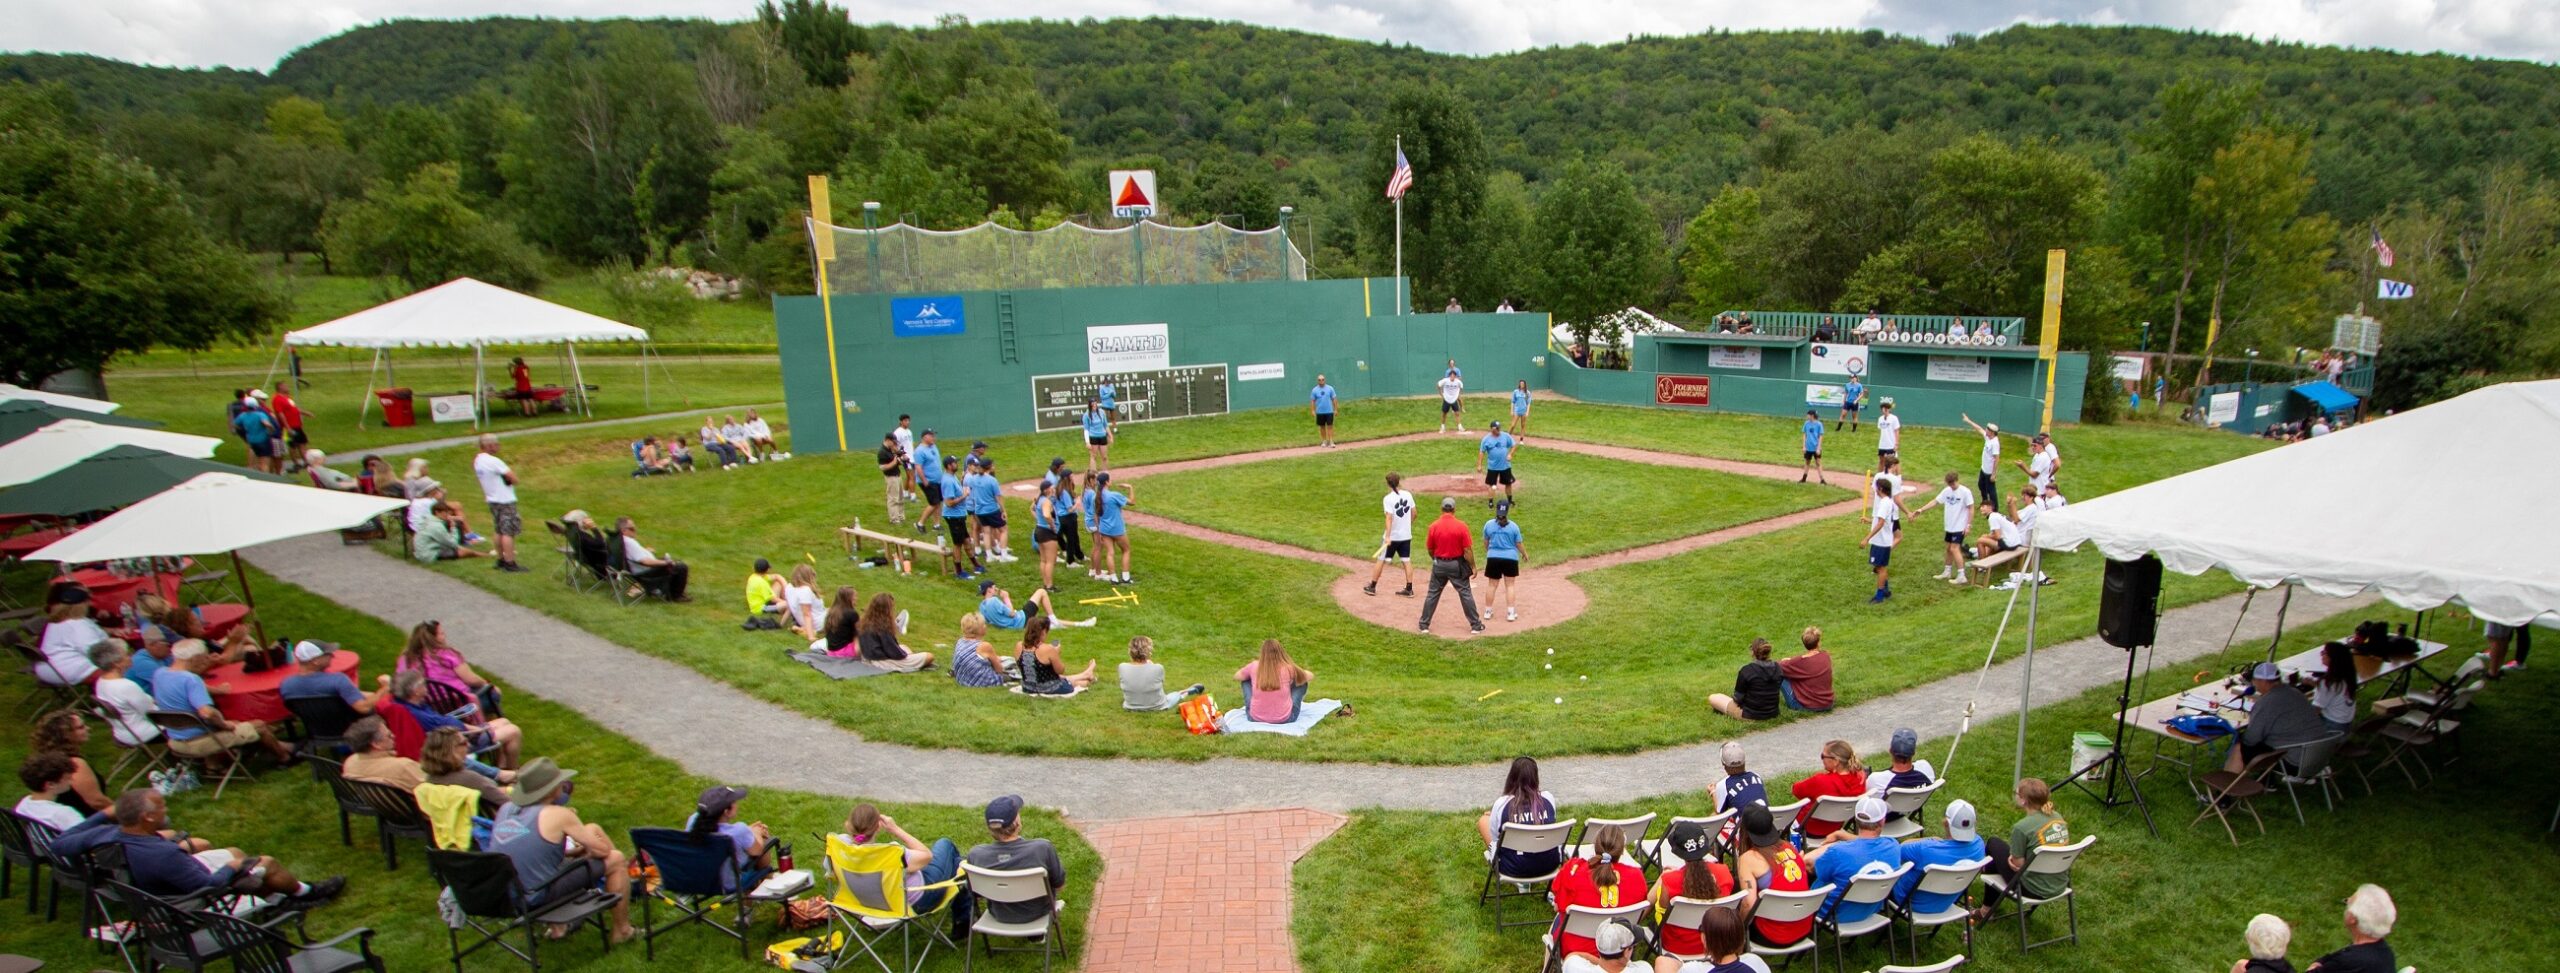 Home Slider 4 – 12th Annual Vermont Summer Classic Schedule